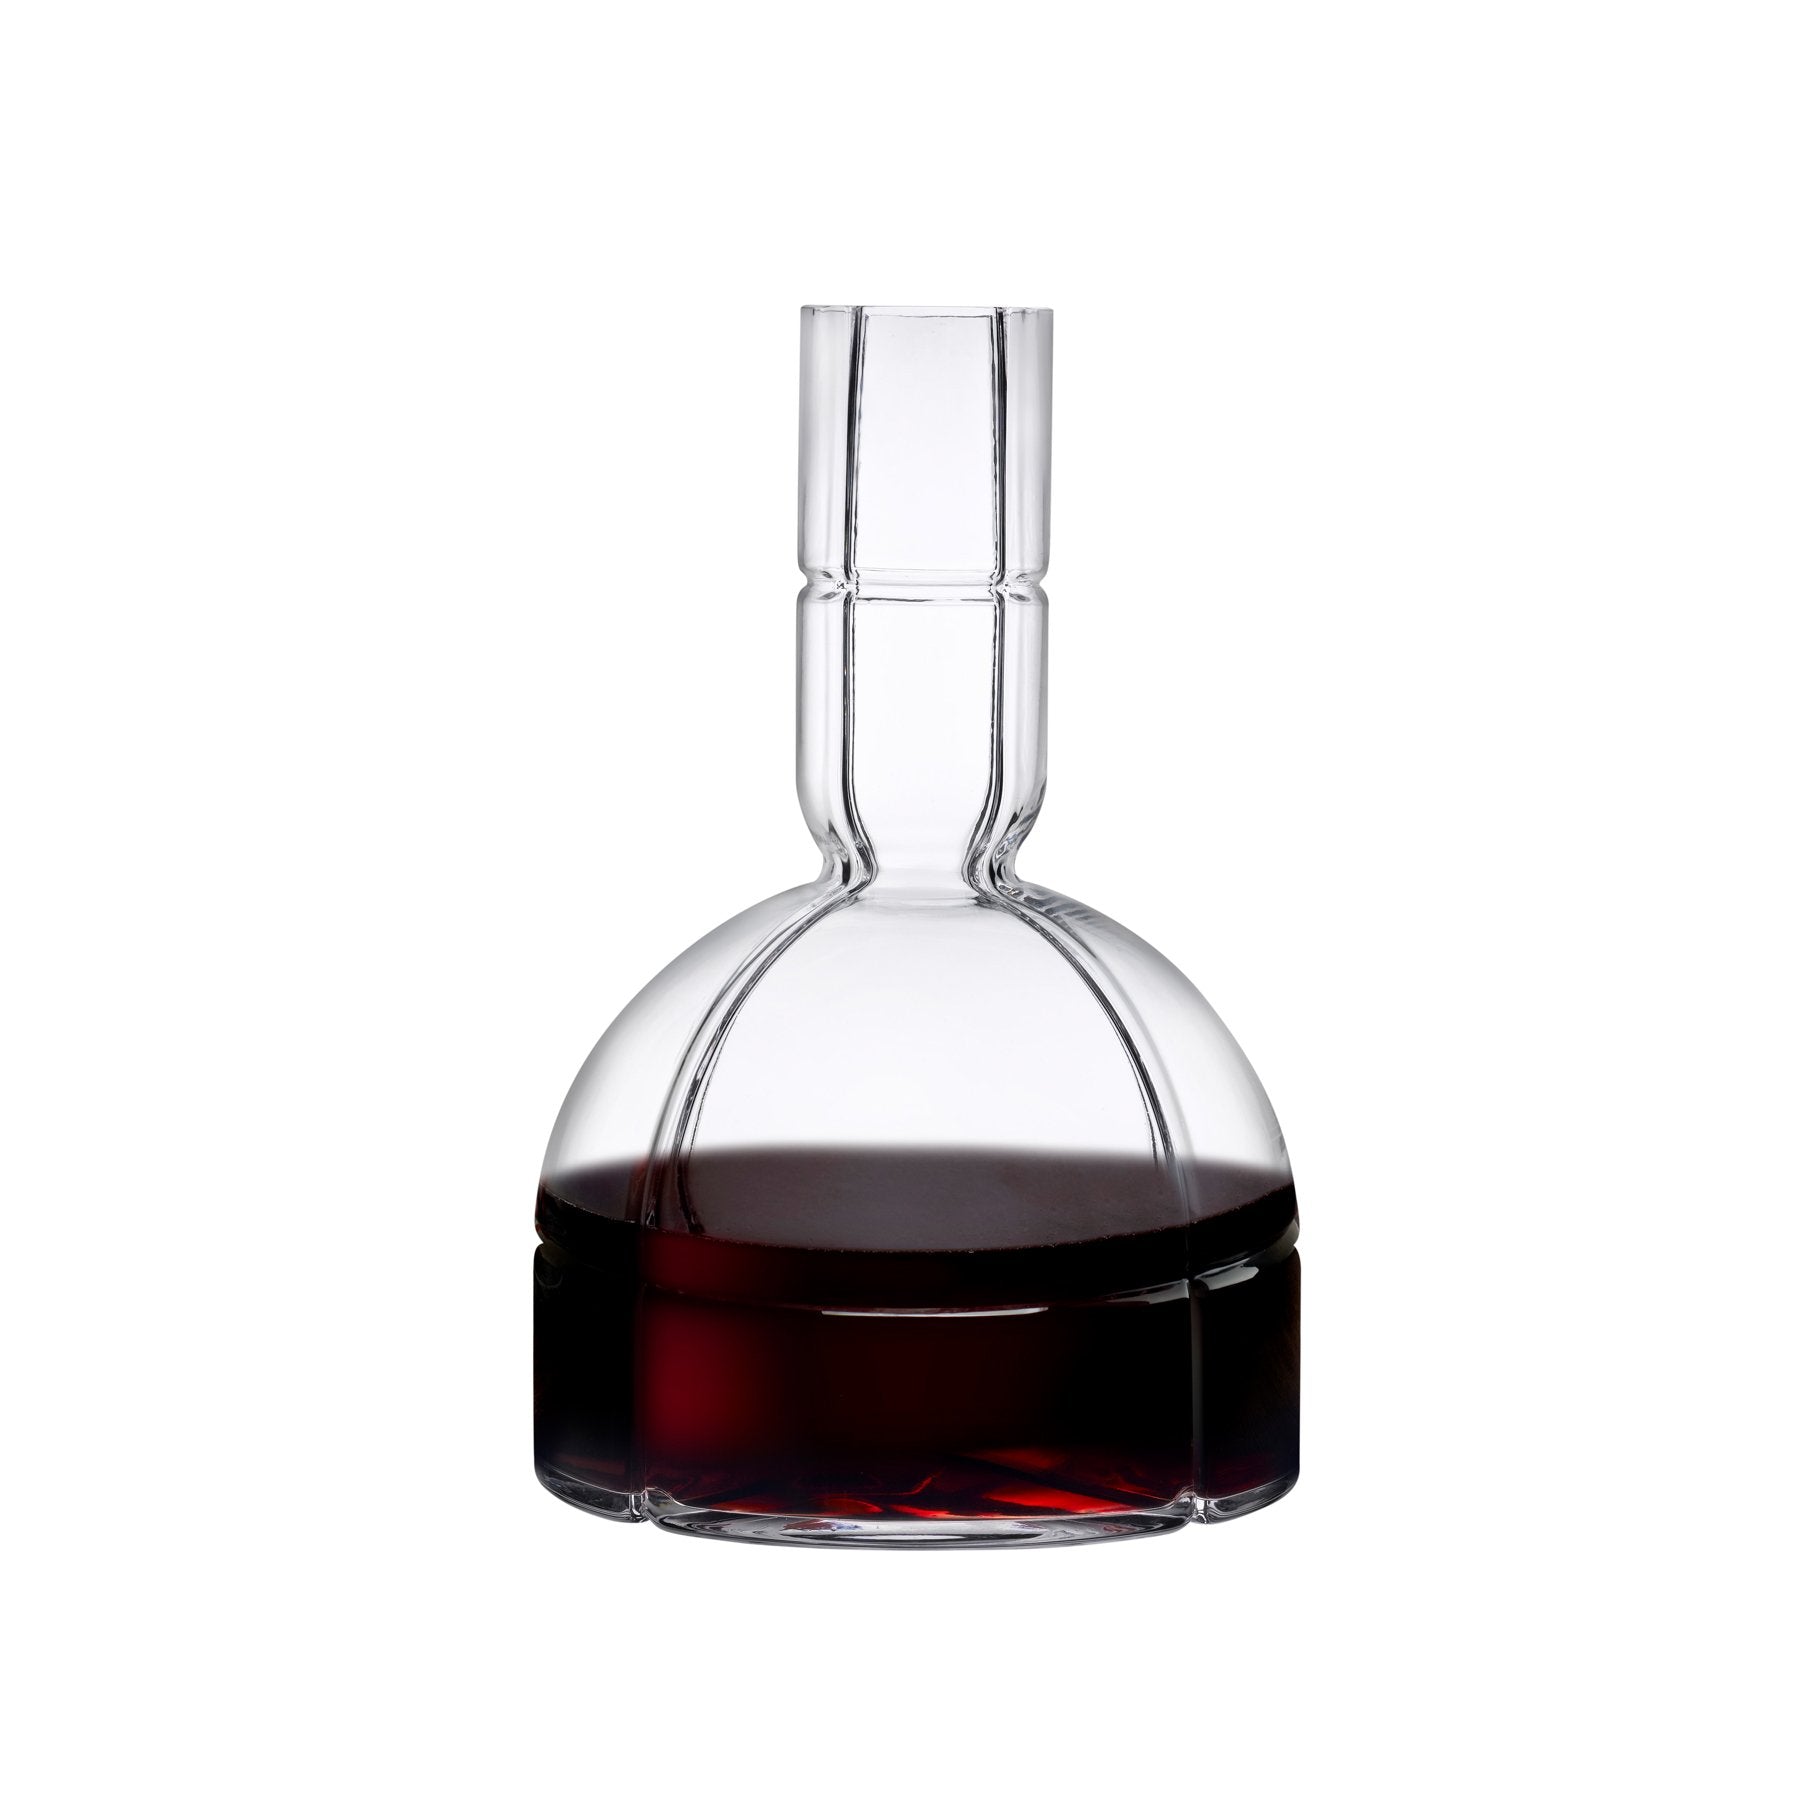 O2 wine carafe by nude at adorn.house 